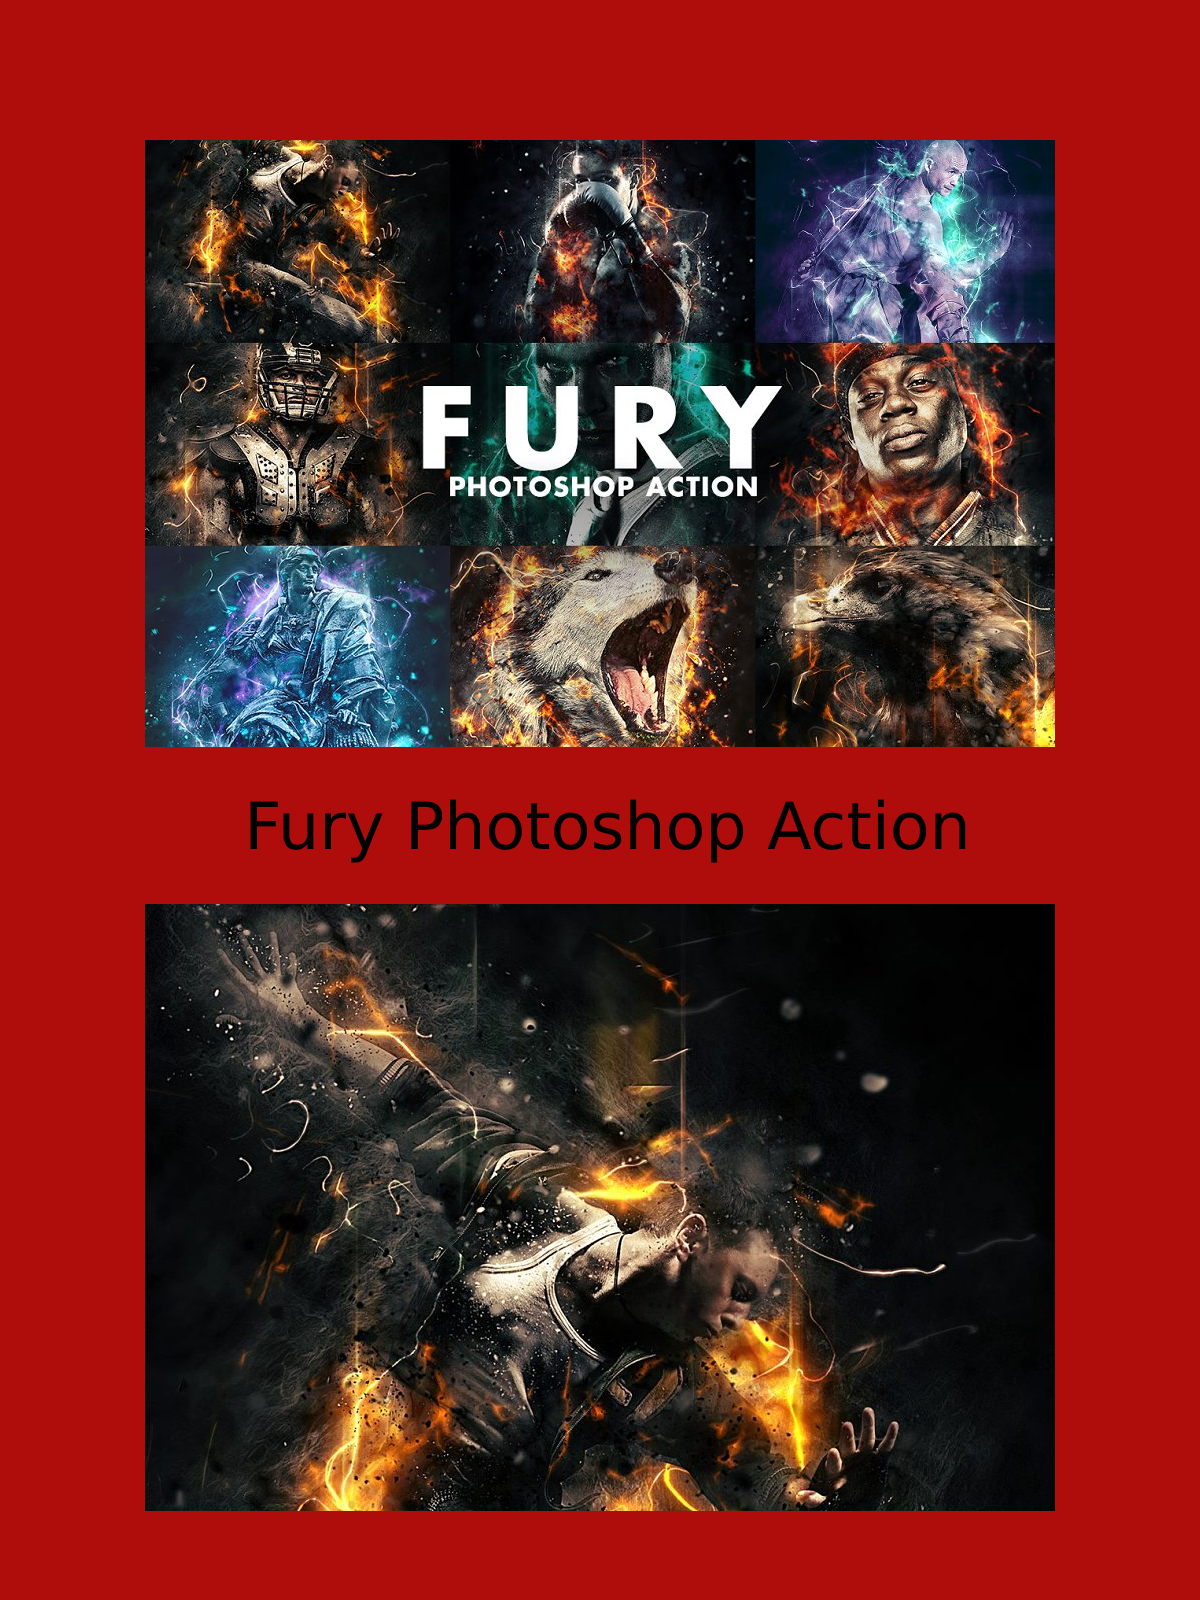 Fury photoshop action - pinterest image preview.